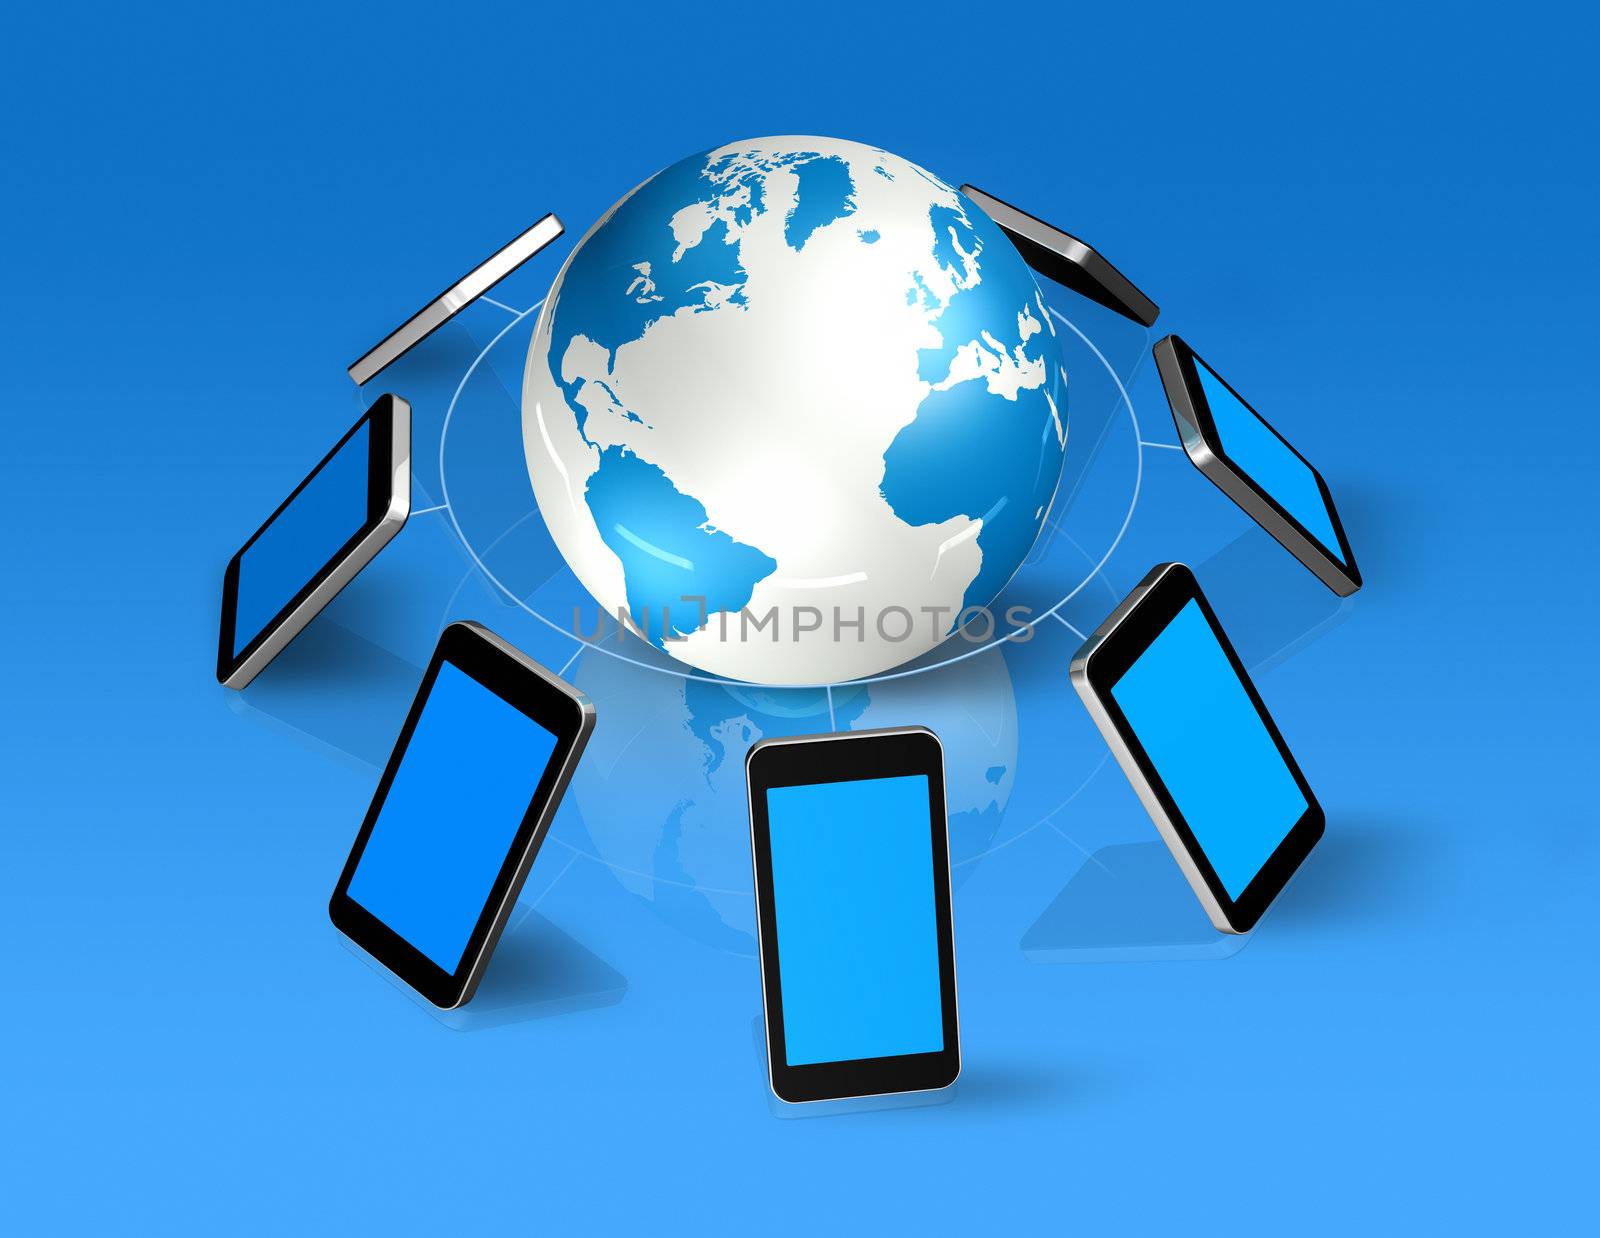 3D mobile phones around a world globe by daboost